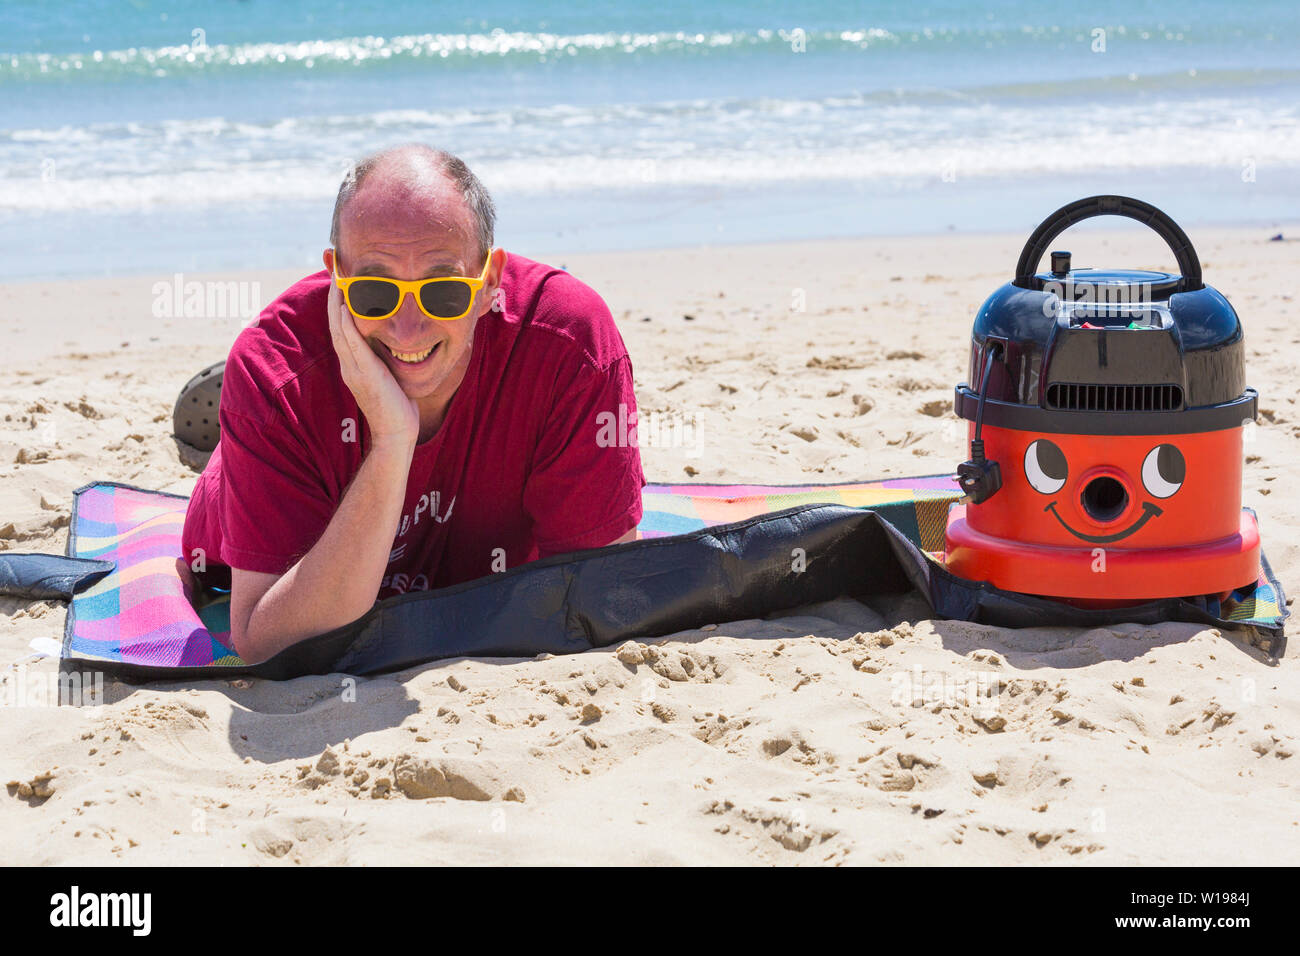 Bournemouth, Dorset, UK. 1st July 2019. Almost all workers are legally entitled to 5.6 weeks’ statutory leave entitlement paid holiday per year, but when was the last time Henry or Hetty had a day off? John took his hands off the nozzle, switched off the turbo charge and gave this hard working Hoover an afternoon off at Bournemouth beach. It also made a statement to make sure the beautiful Bournemouth, Christchurch & Poole beaches gain an awareness of the litter left behind every summer and that Henry and Hetty don't approve! Credit: Carolyn Jenkins/Alamy Live News Stock Photo